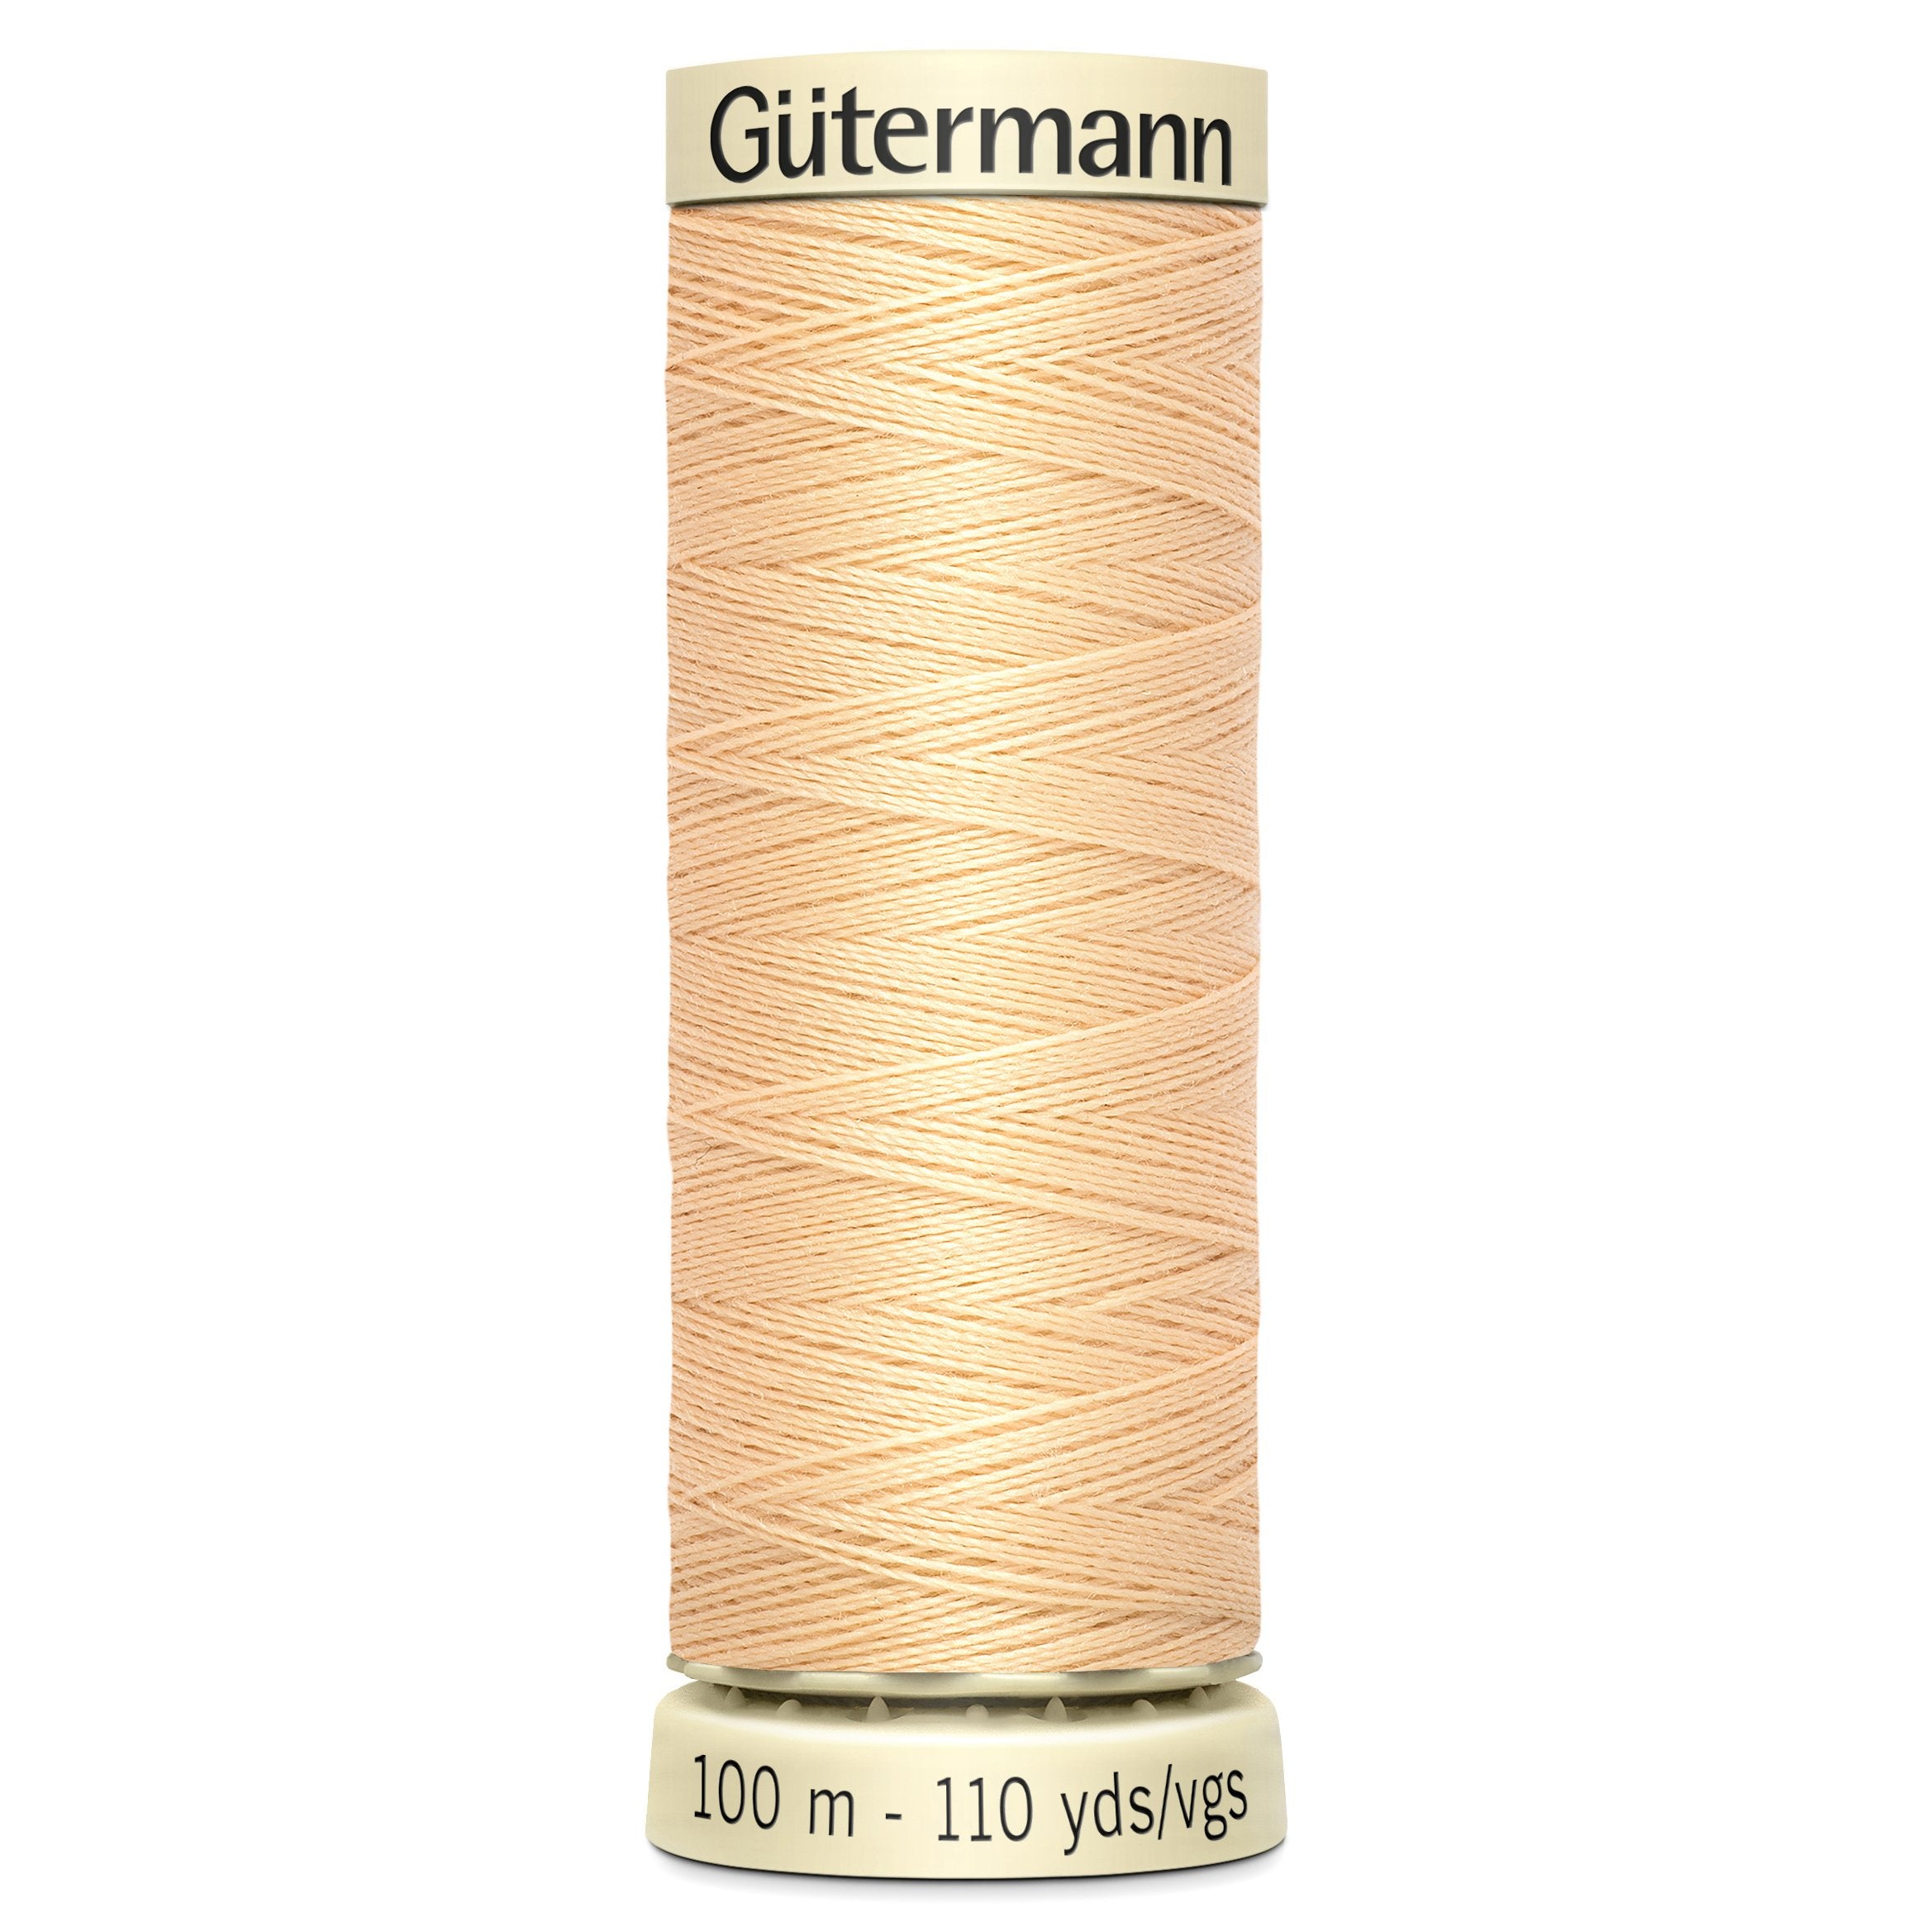 Gutermann Sew All Thread colour 6 Sand from Jaycotts Sewing Supplies